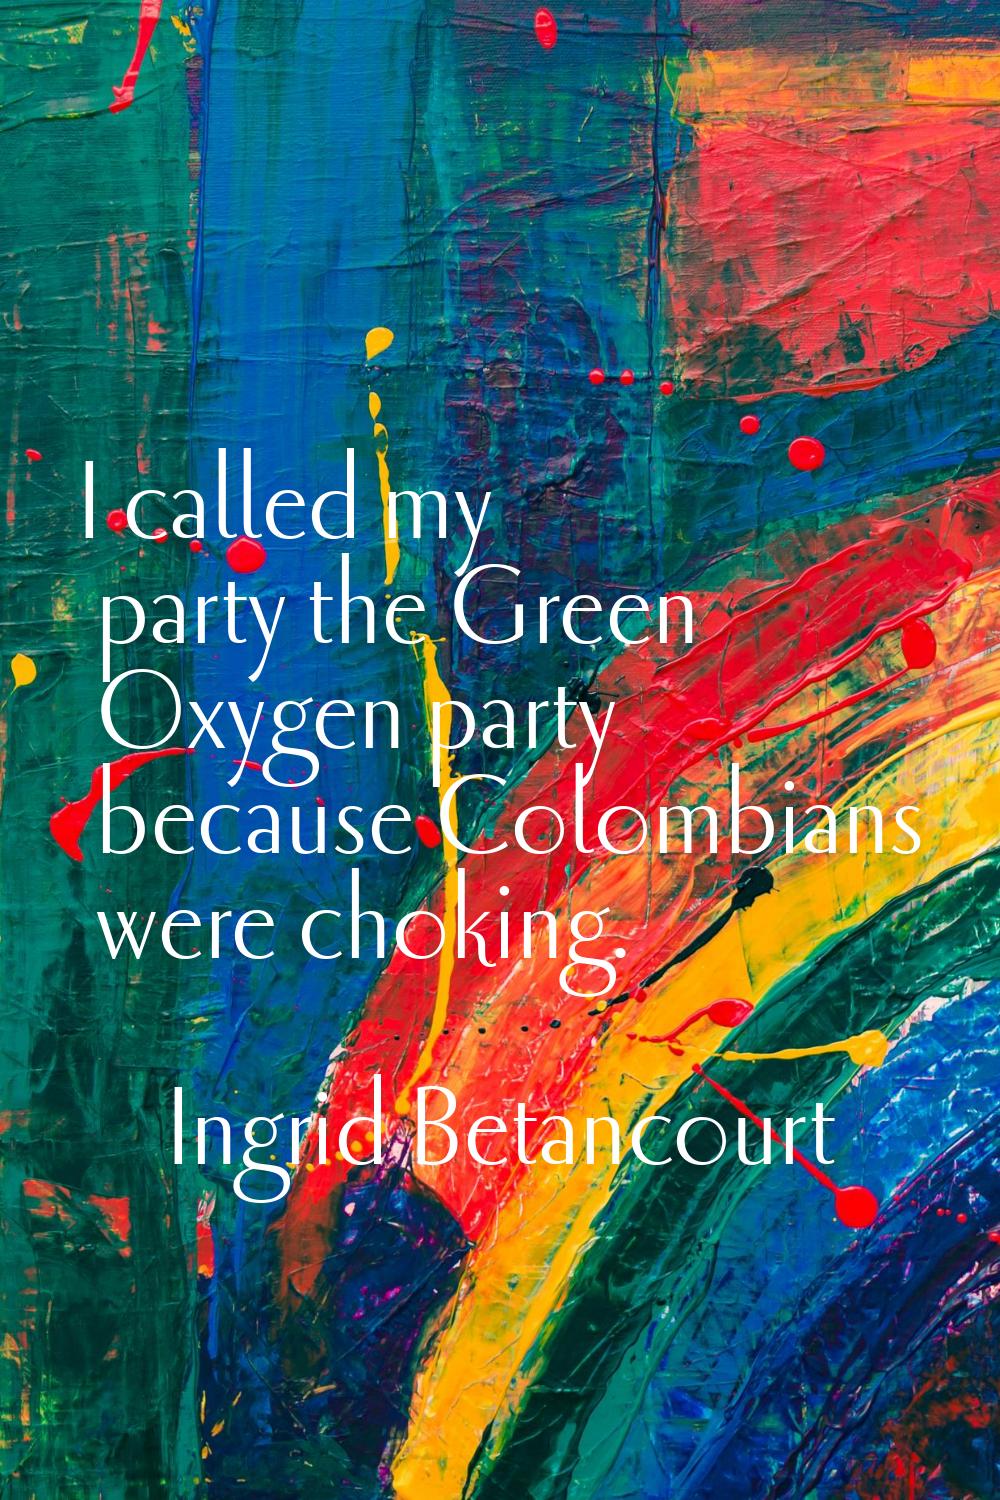 I called my party the Green Oxygen party because Colombians were choking.